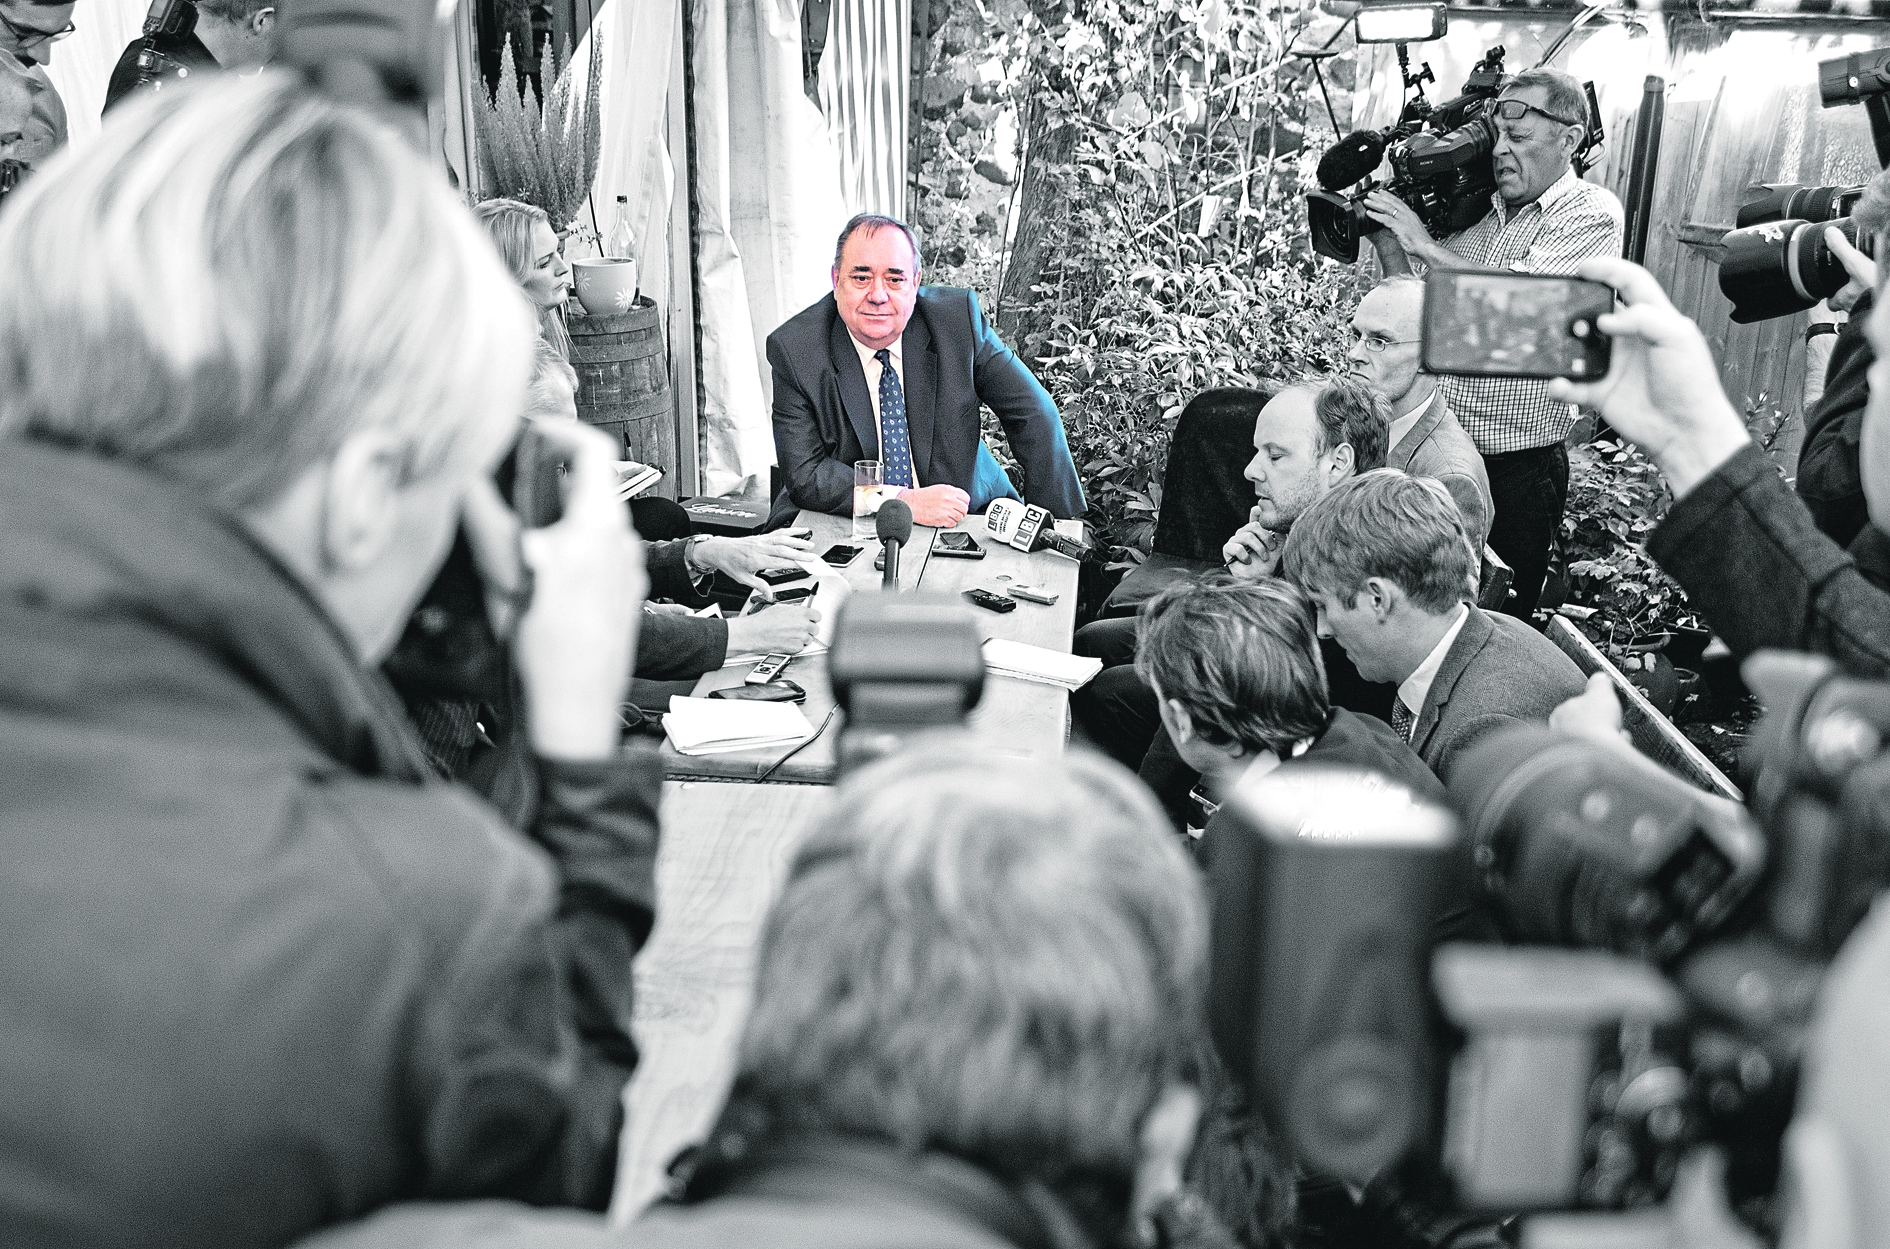 Alex Salmond speaks to journalists in Linlithgow last month when allegations of sexual misconduct against the former FM were made public in August